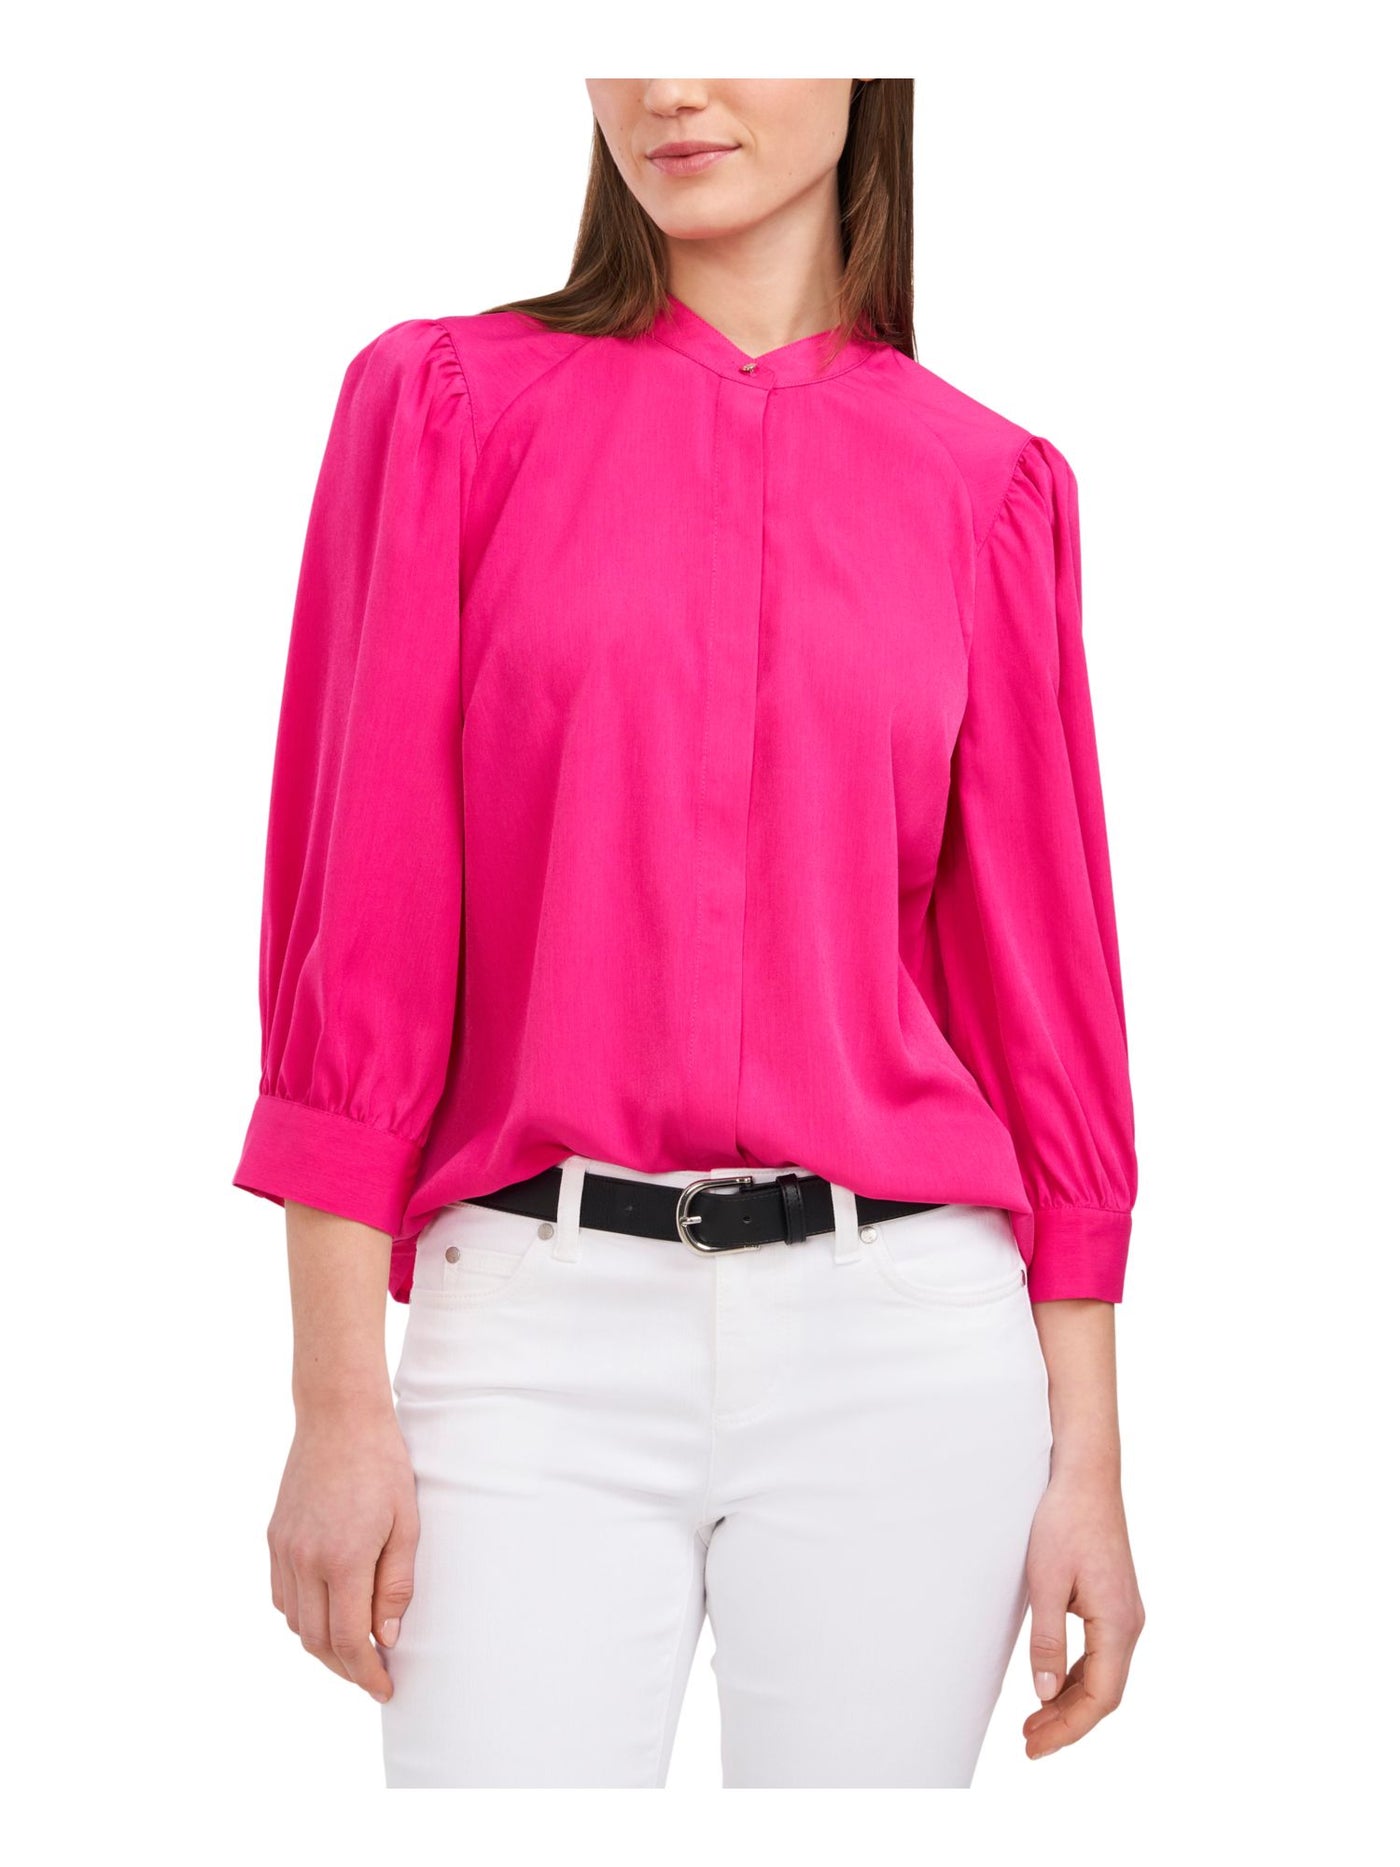 RILEY&RAE Womens Pink Pleated Darted Cuffed Sleeve Blouse M